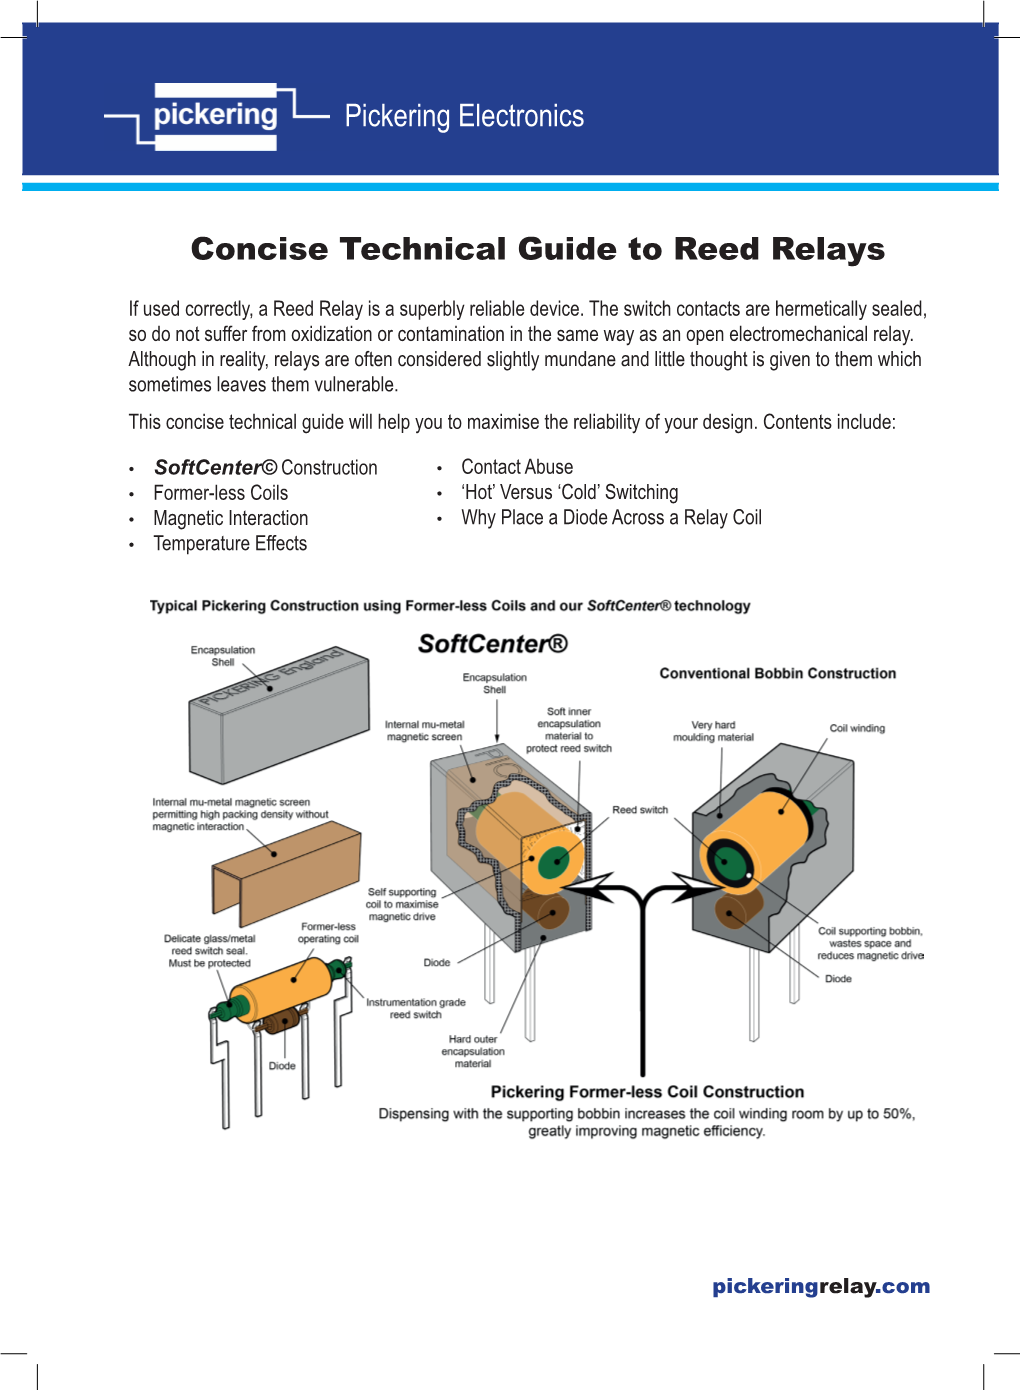 Pickering Electronics Concise Technical Guide to Reed Relays